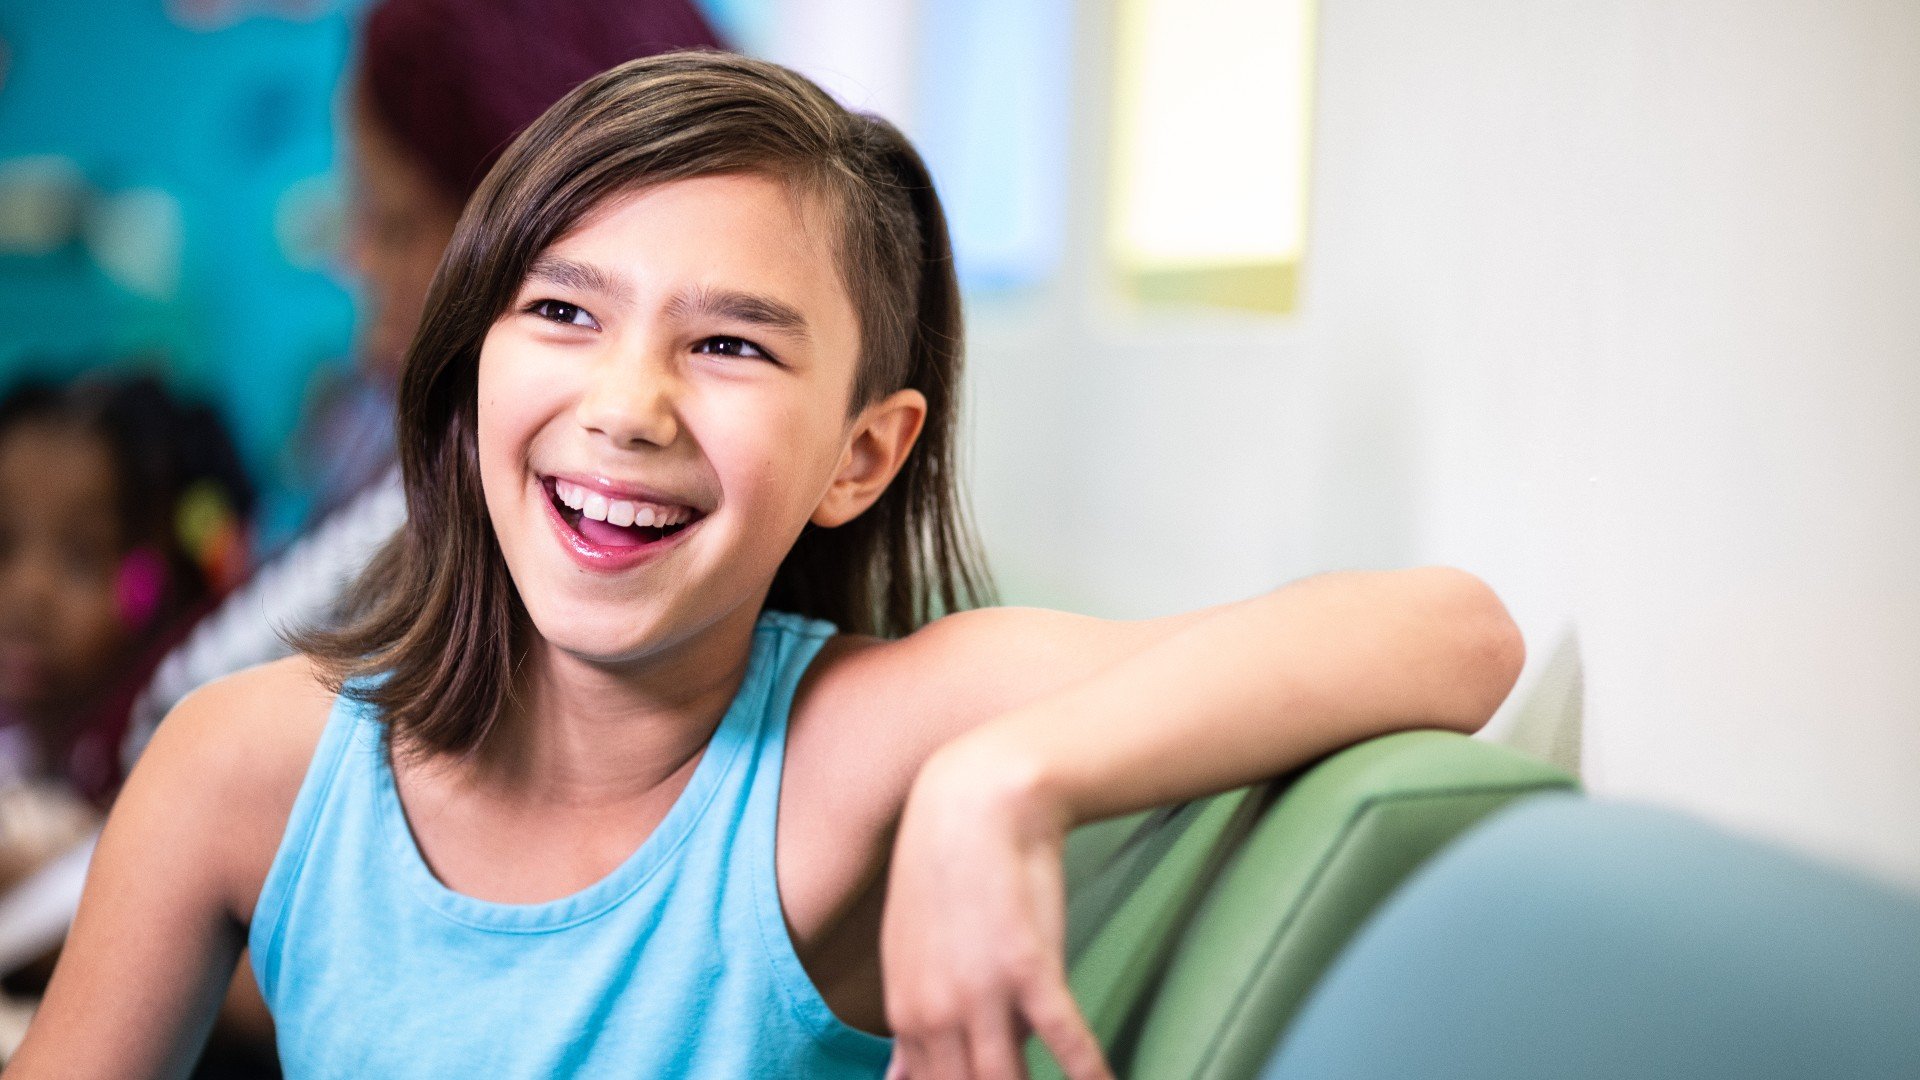 Young girl smiling in waiting room